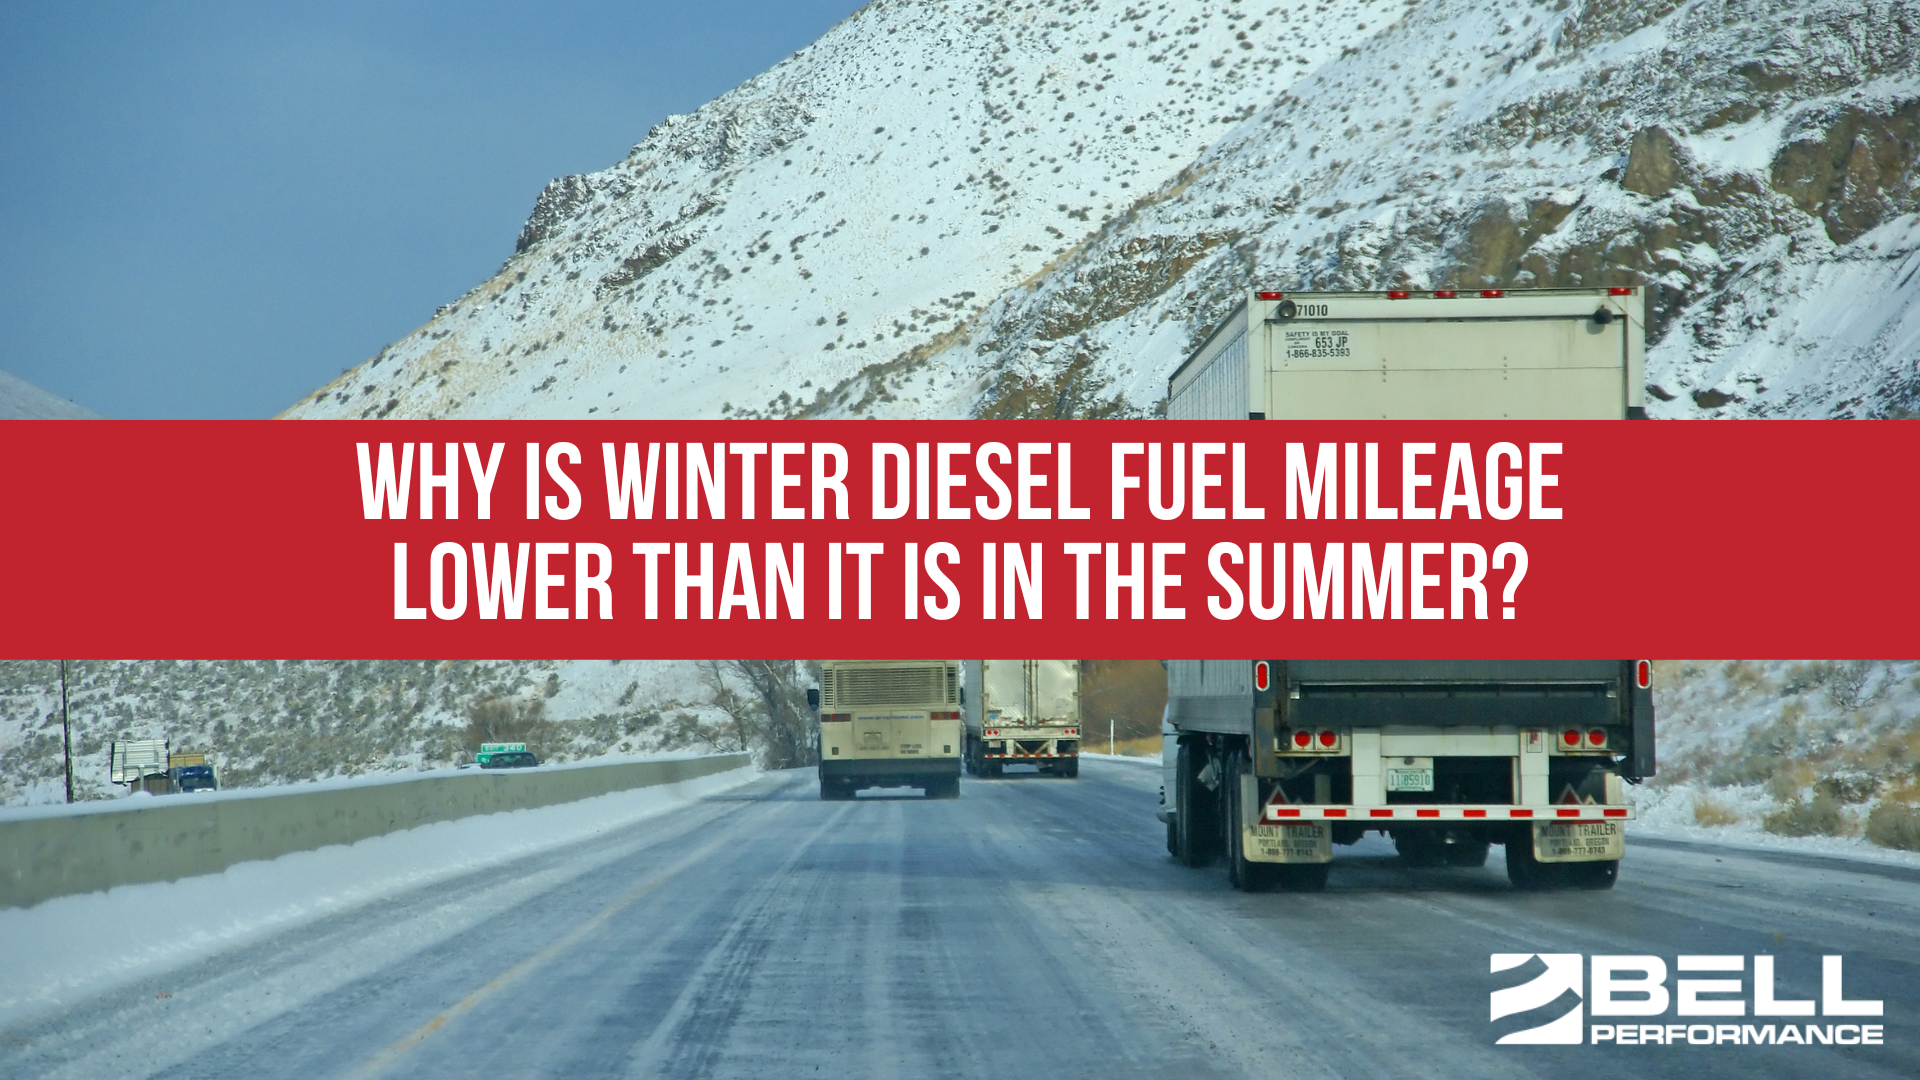 Why is winter diesel fuel mileage lower than it is in the summer?